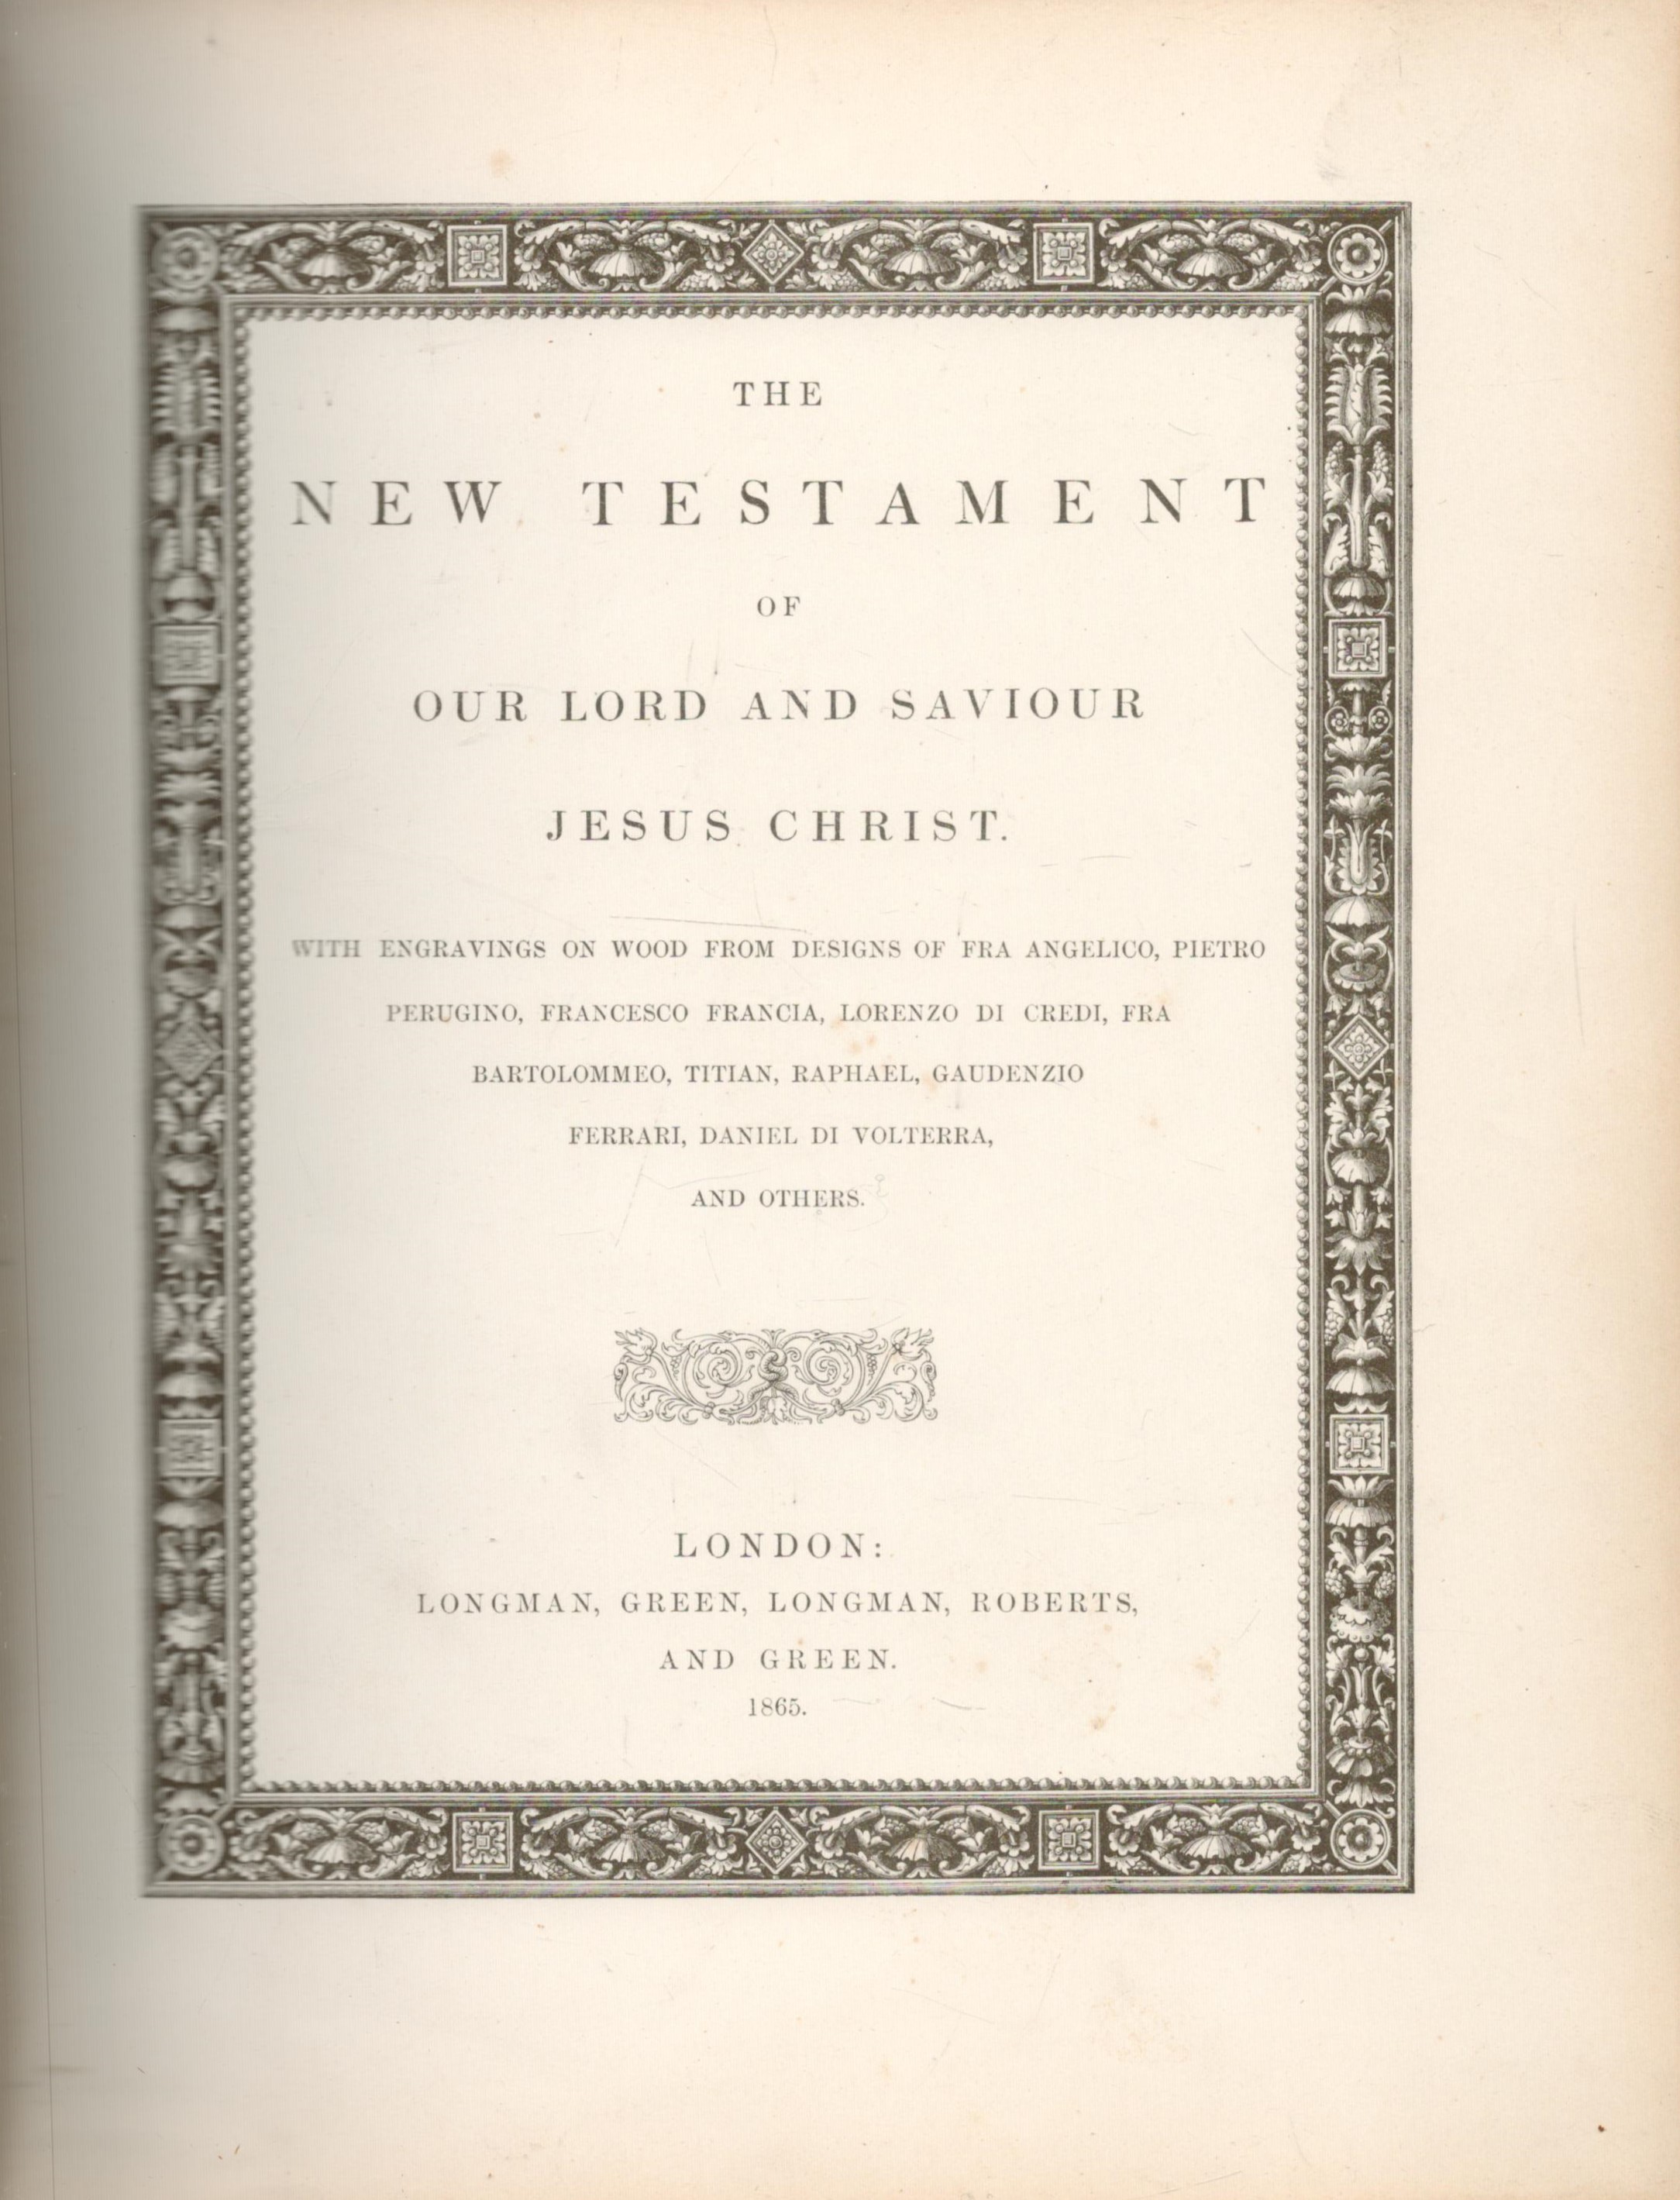 The New Testament of Our Lord and Saviour Jesus Christ. With engravings on wood from the designs - Image 2 of 2